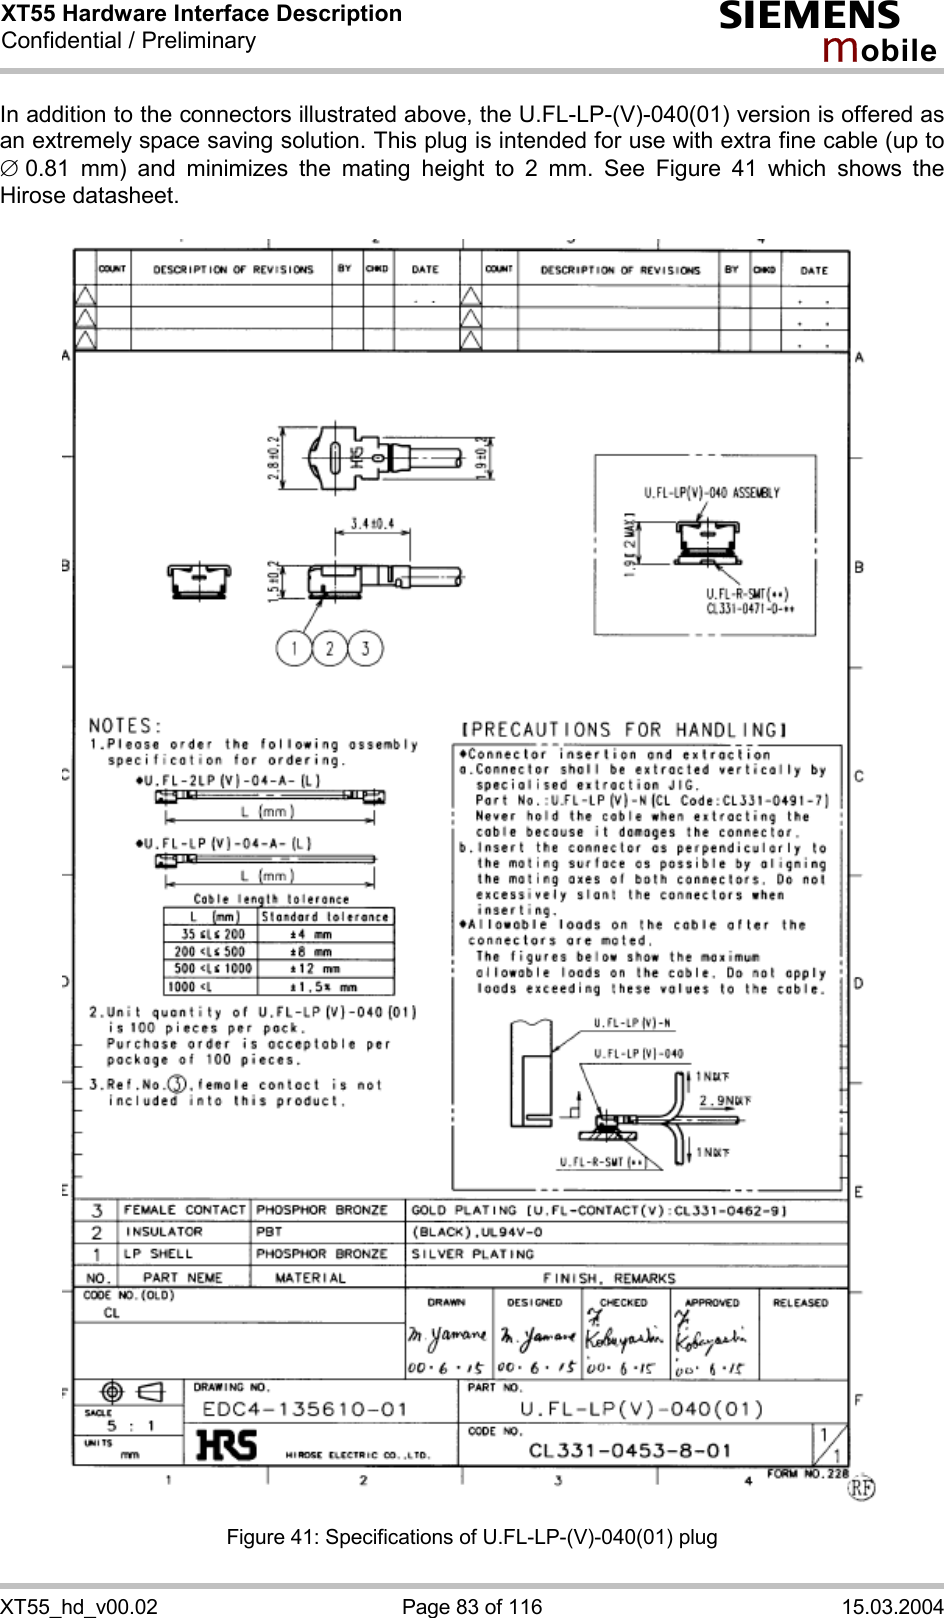 XT55 Hardware Interface Description Confidential / Preliminary s mo b i l e XT55_hd_v00.02  Page 83 of 116  15.03.2004 In addition to the connectors illustrated above, the U.FL-LP-(V)-040(01) version is offered as an extremely space saving solution. This plug is intended for use with extra fine cable (up to Æ 0.81 mm) and minimizes the mating height to 2 mm. See Figure 41 which shows the Hirose datasheet.    Figure 41: Specifications of U.FL-LP-(V)-040(01) plug 